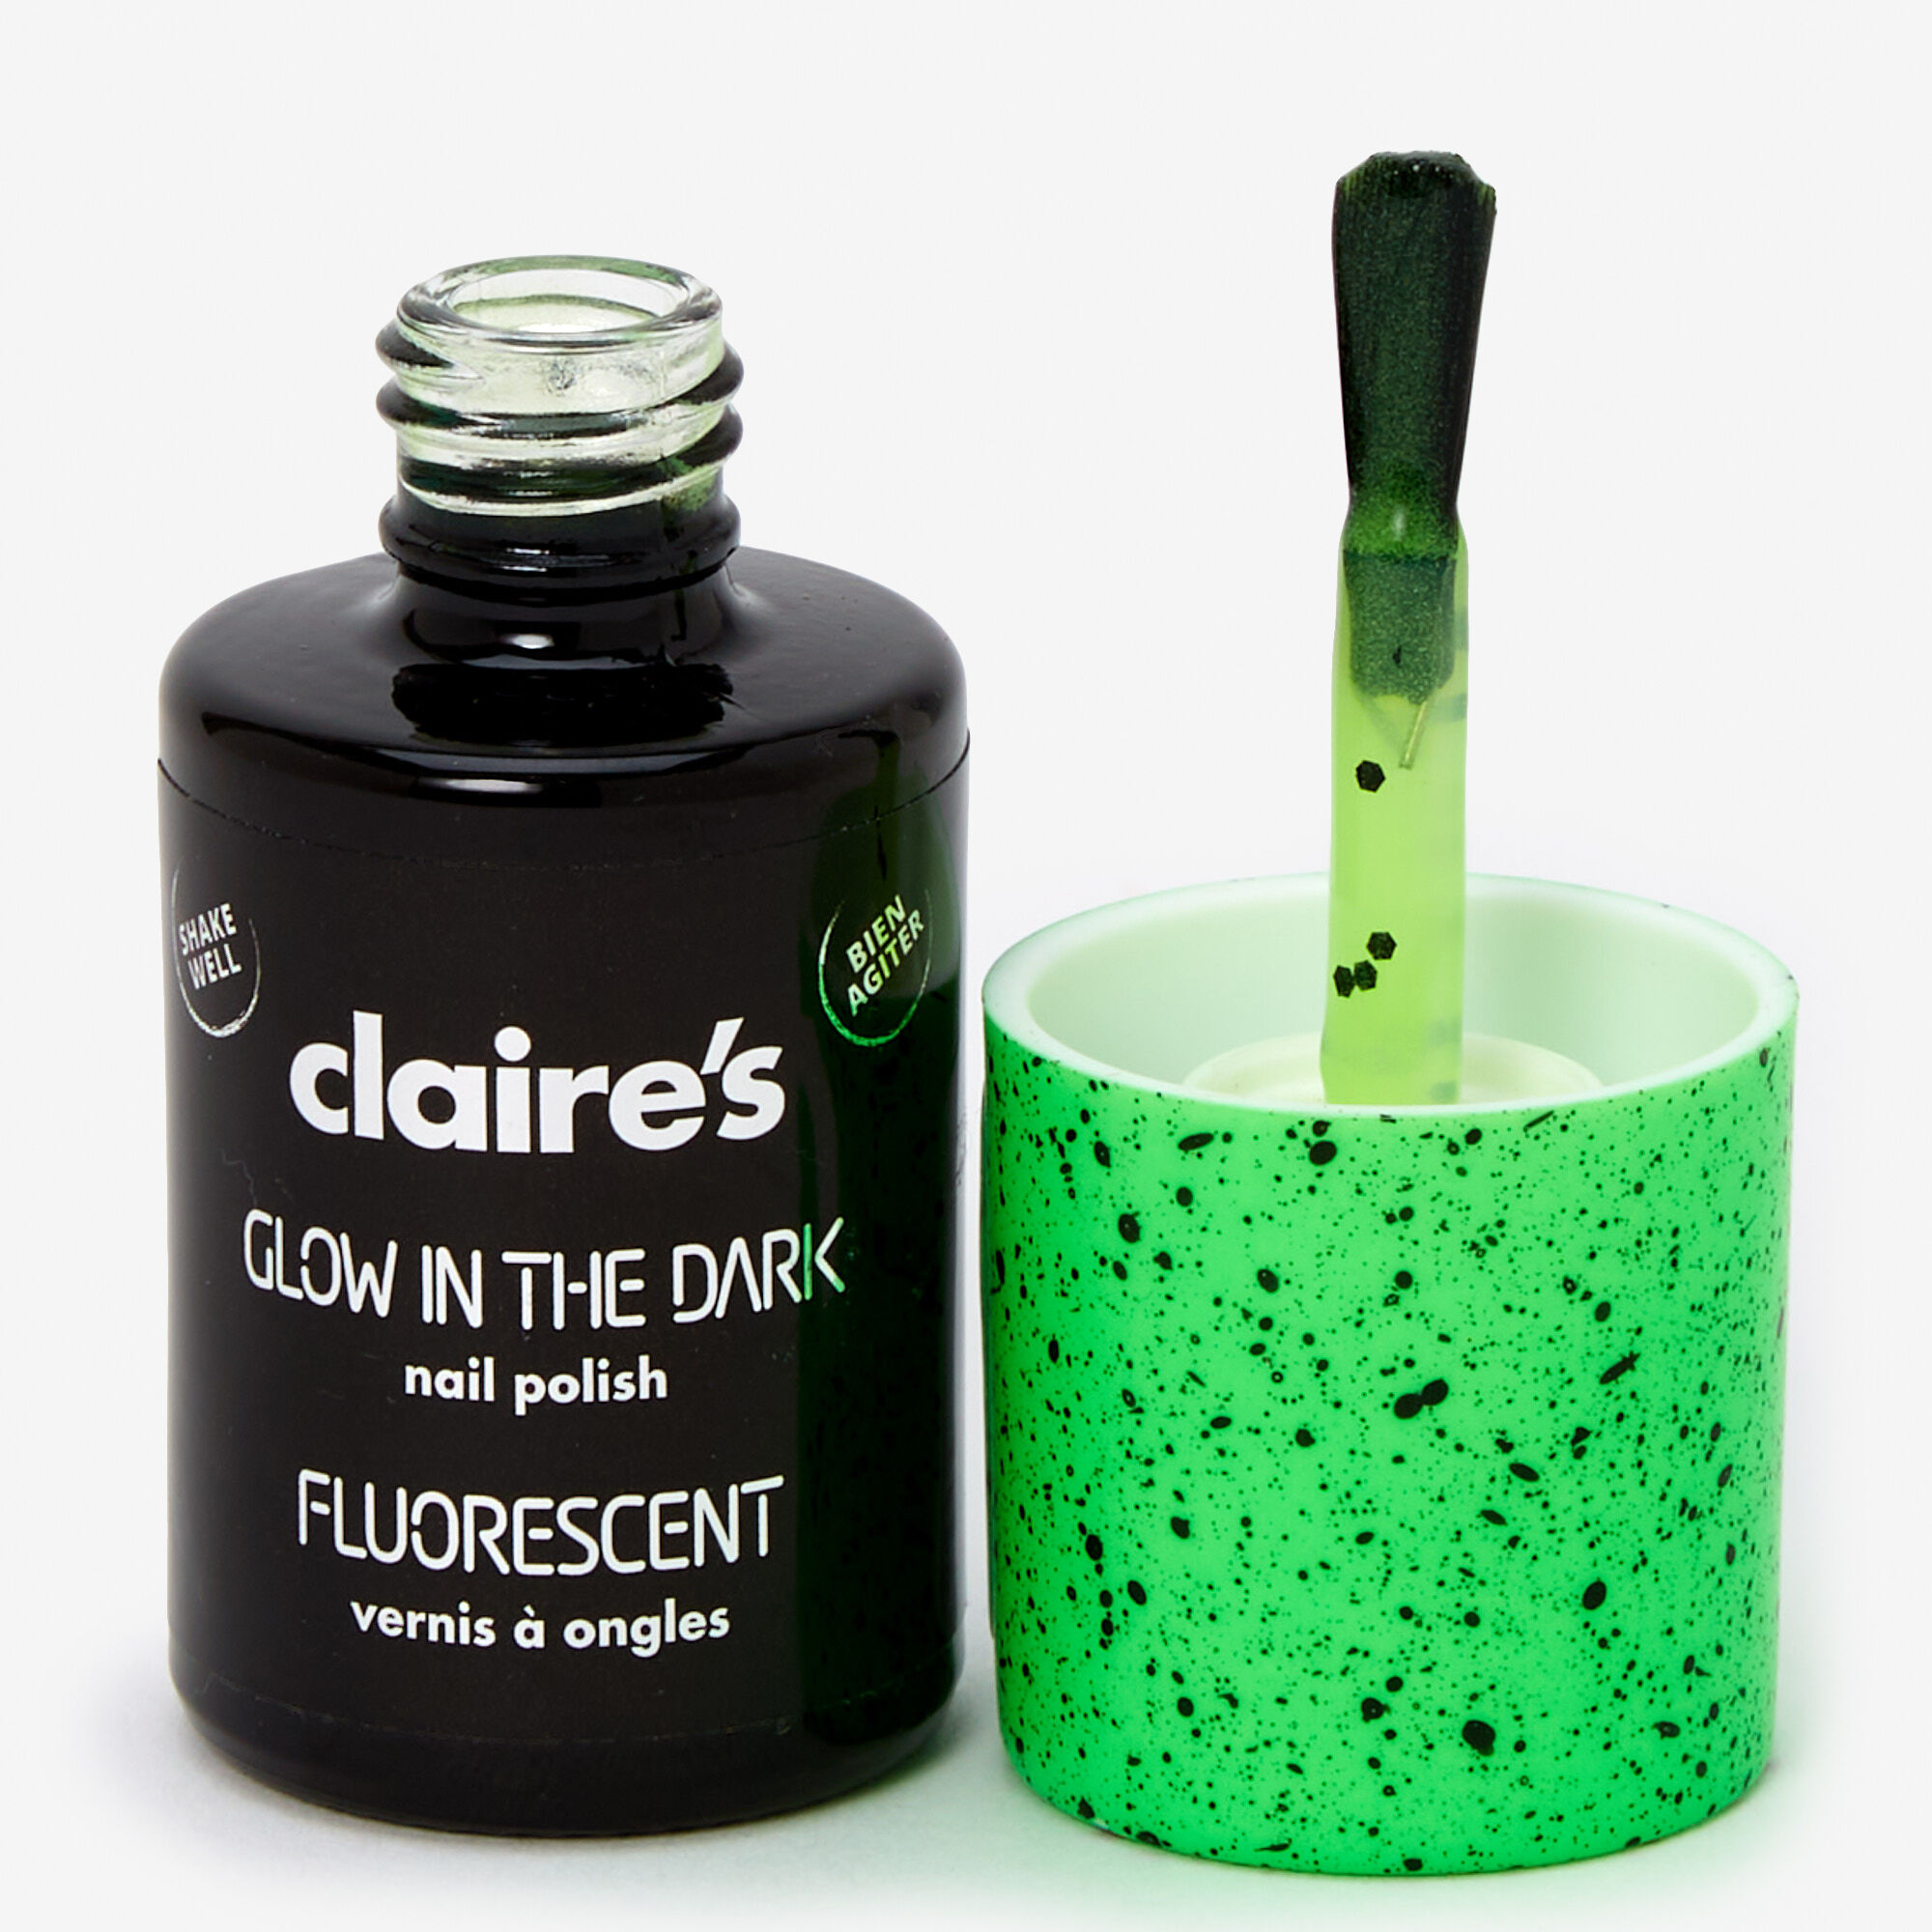 Claire's - Have you tried our glow-in-the-dark nail polish yet